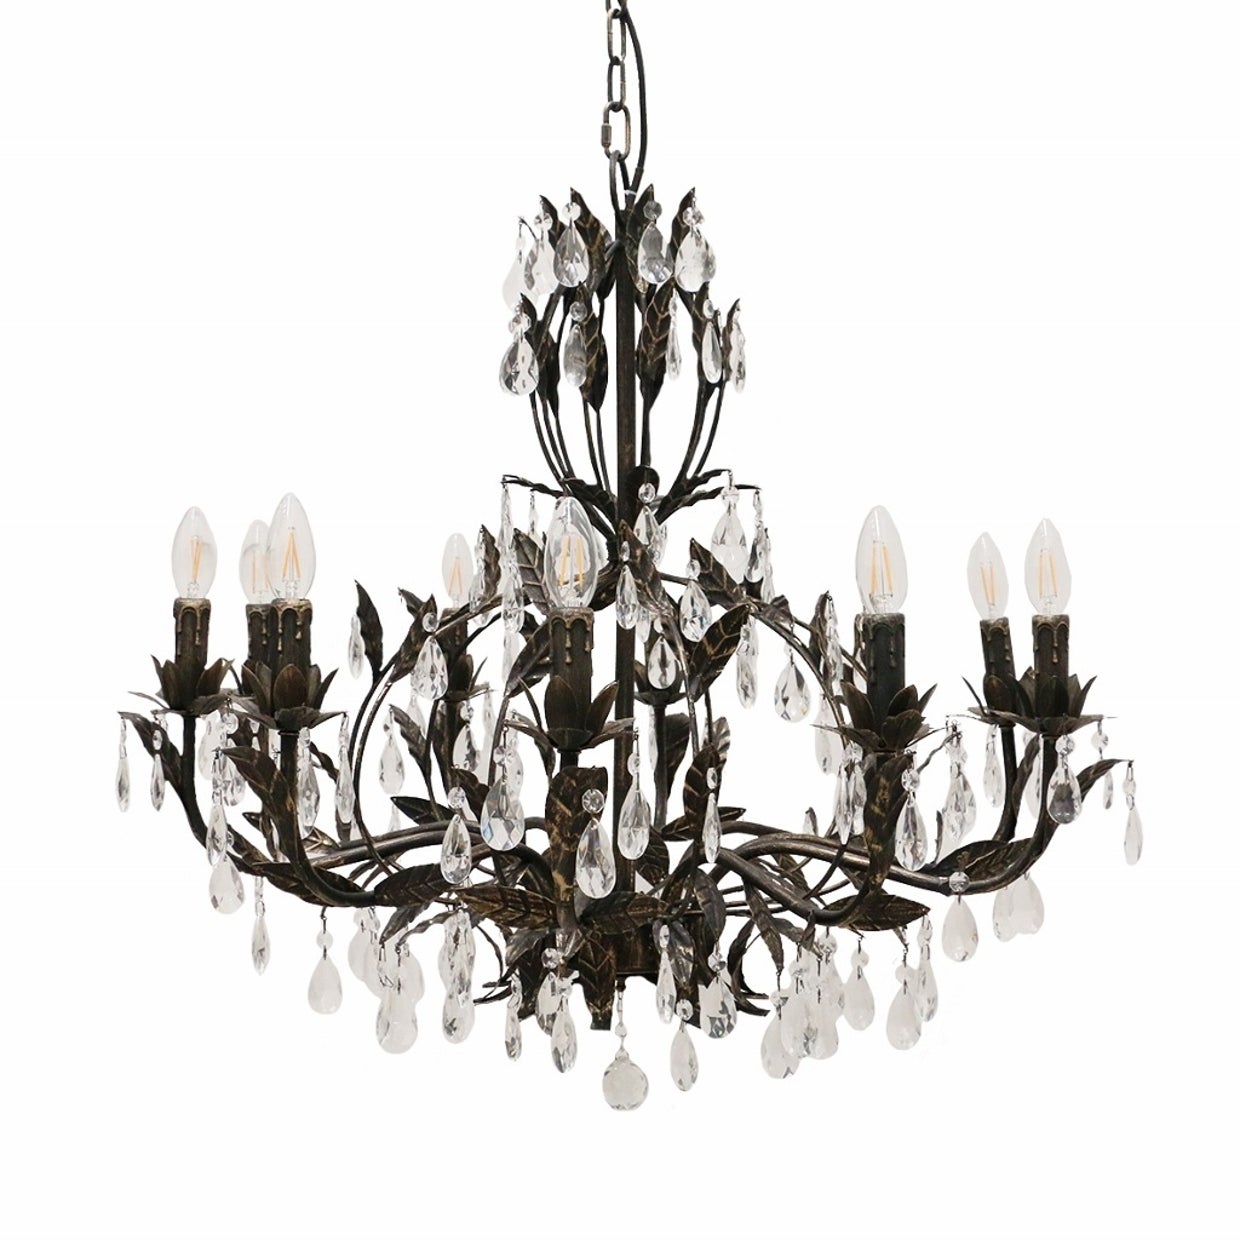 Large Fleurence Chandelier - Black and Gold with Glass Crystals